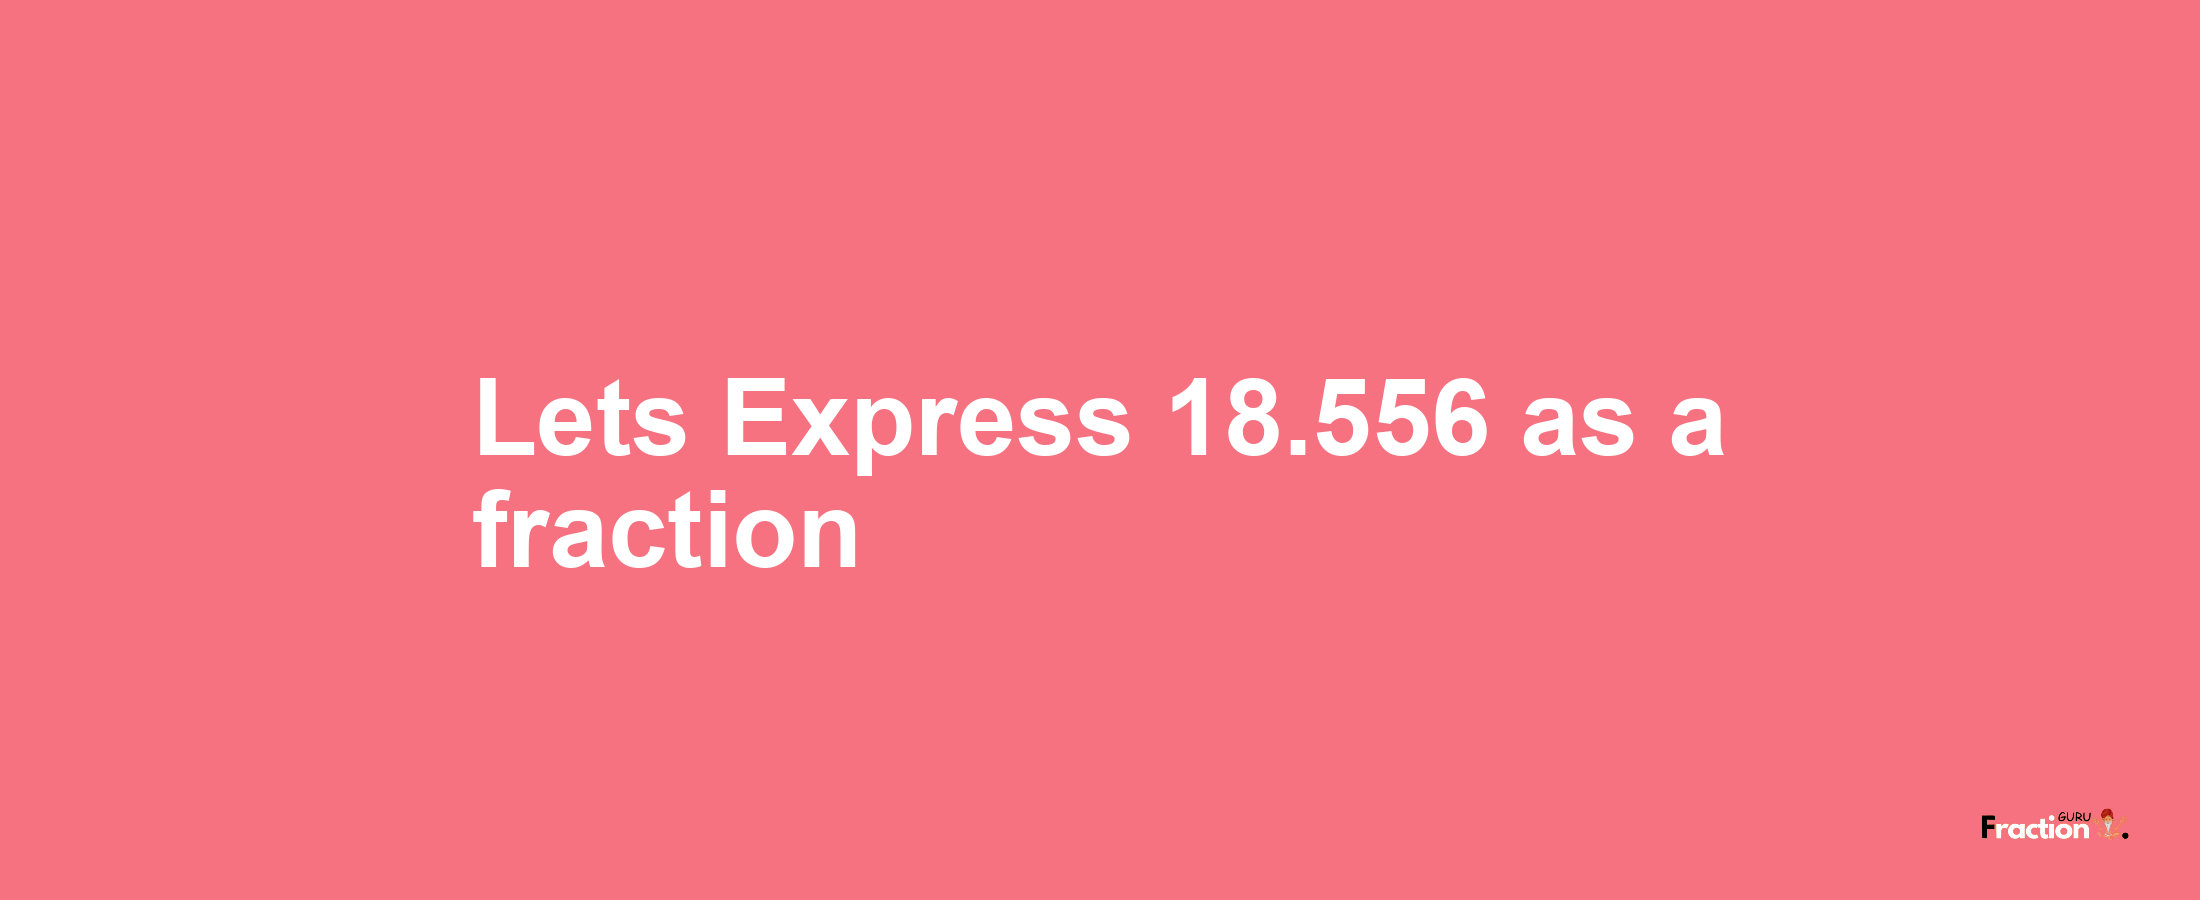 Lets Express 18.556 as afraction